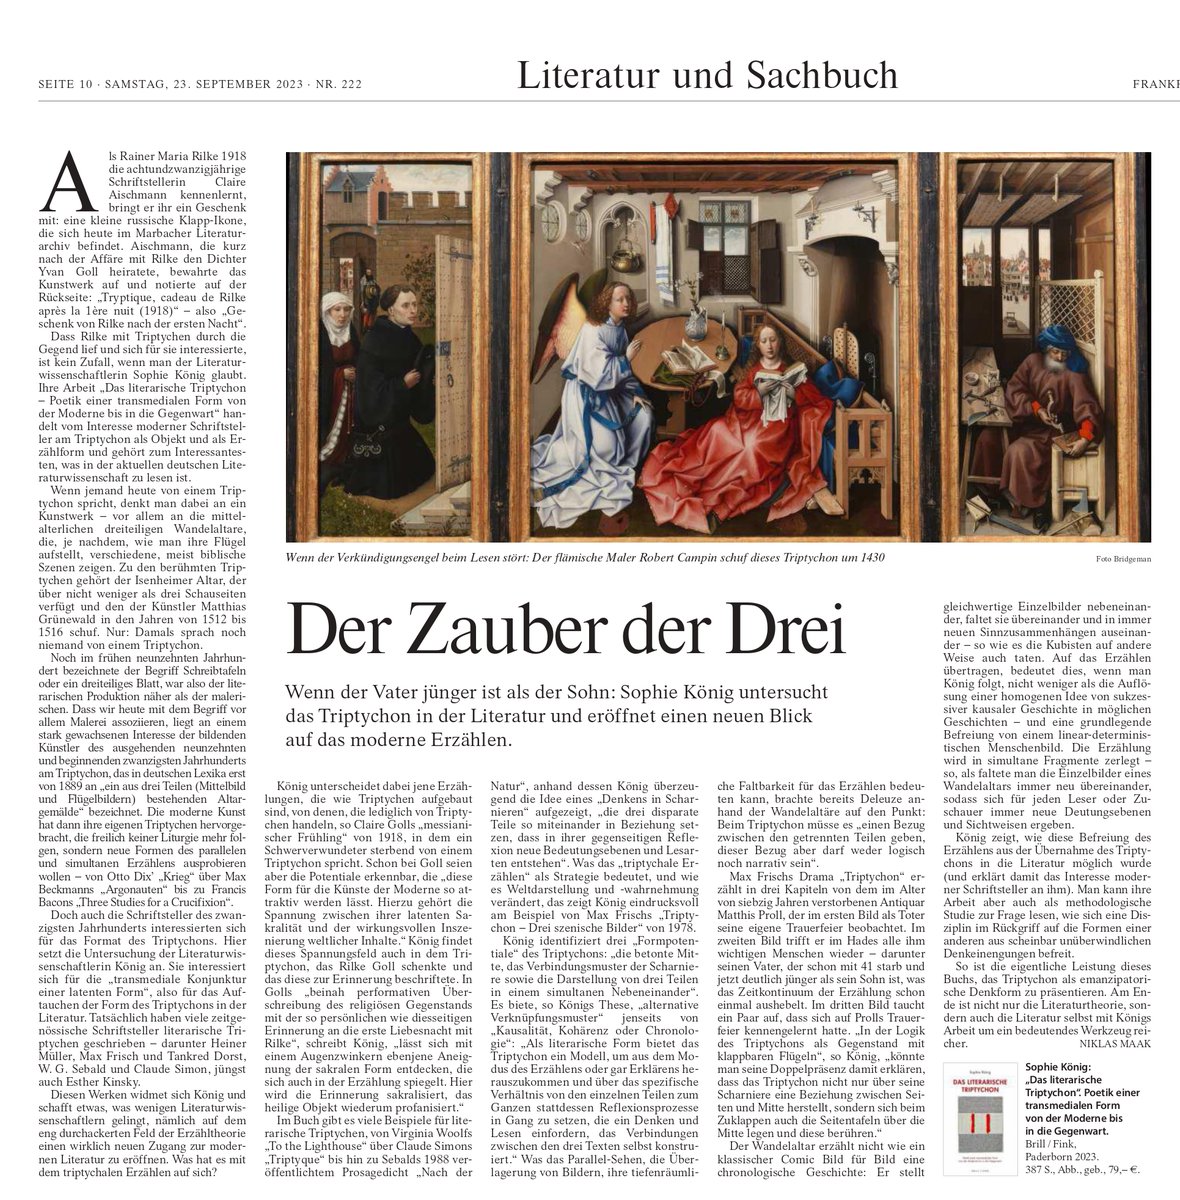 When your friend's monograph gets reviewed in the FAZ! Do read Sophie König's amazing book on literary triptychs!